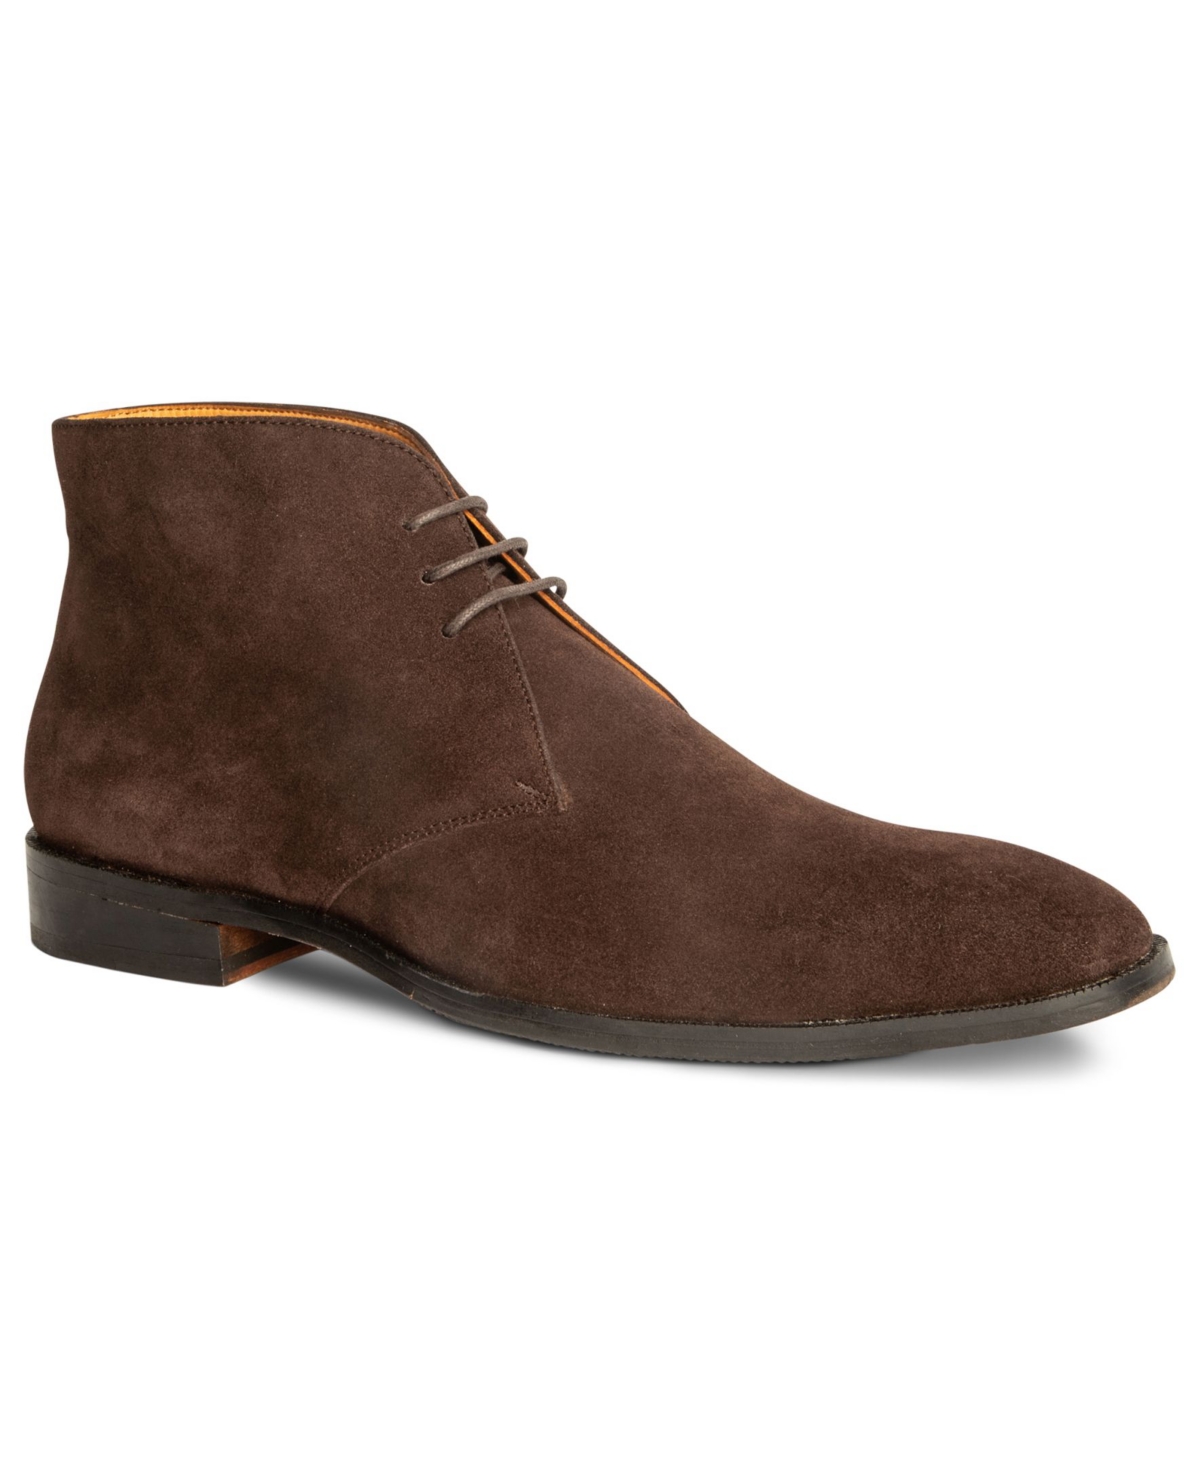 Corazon Chukka Boots Men's Lace-Up Casual - Chocolate